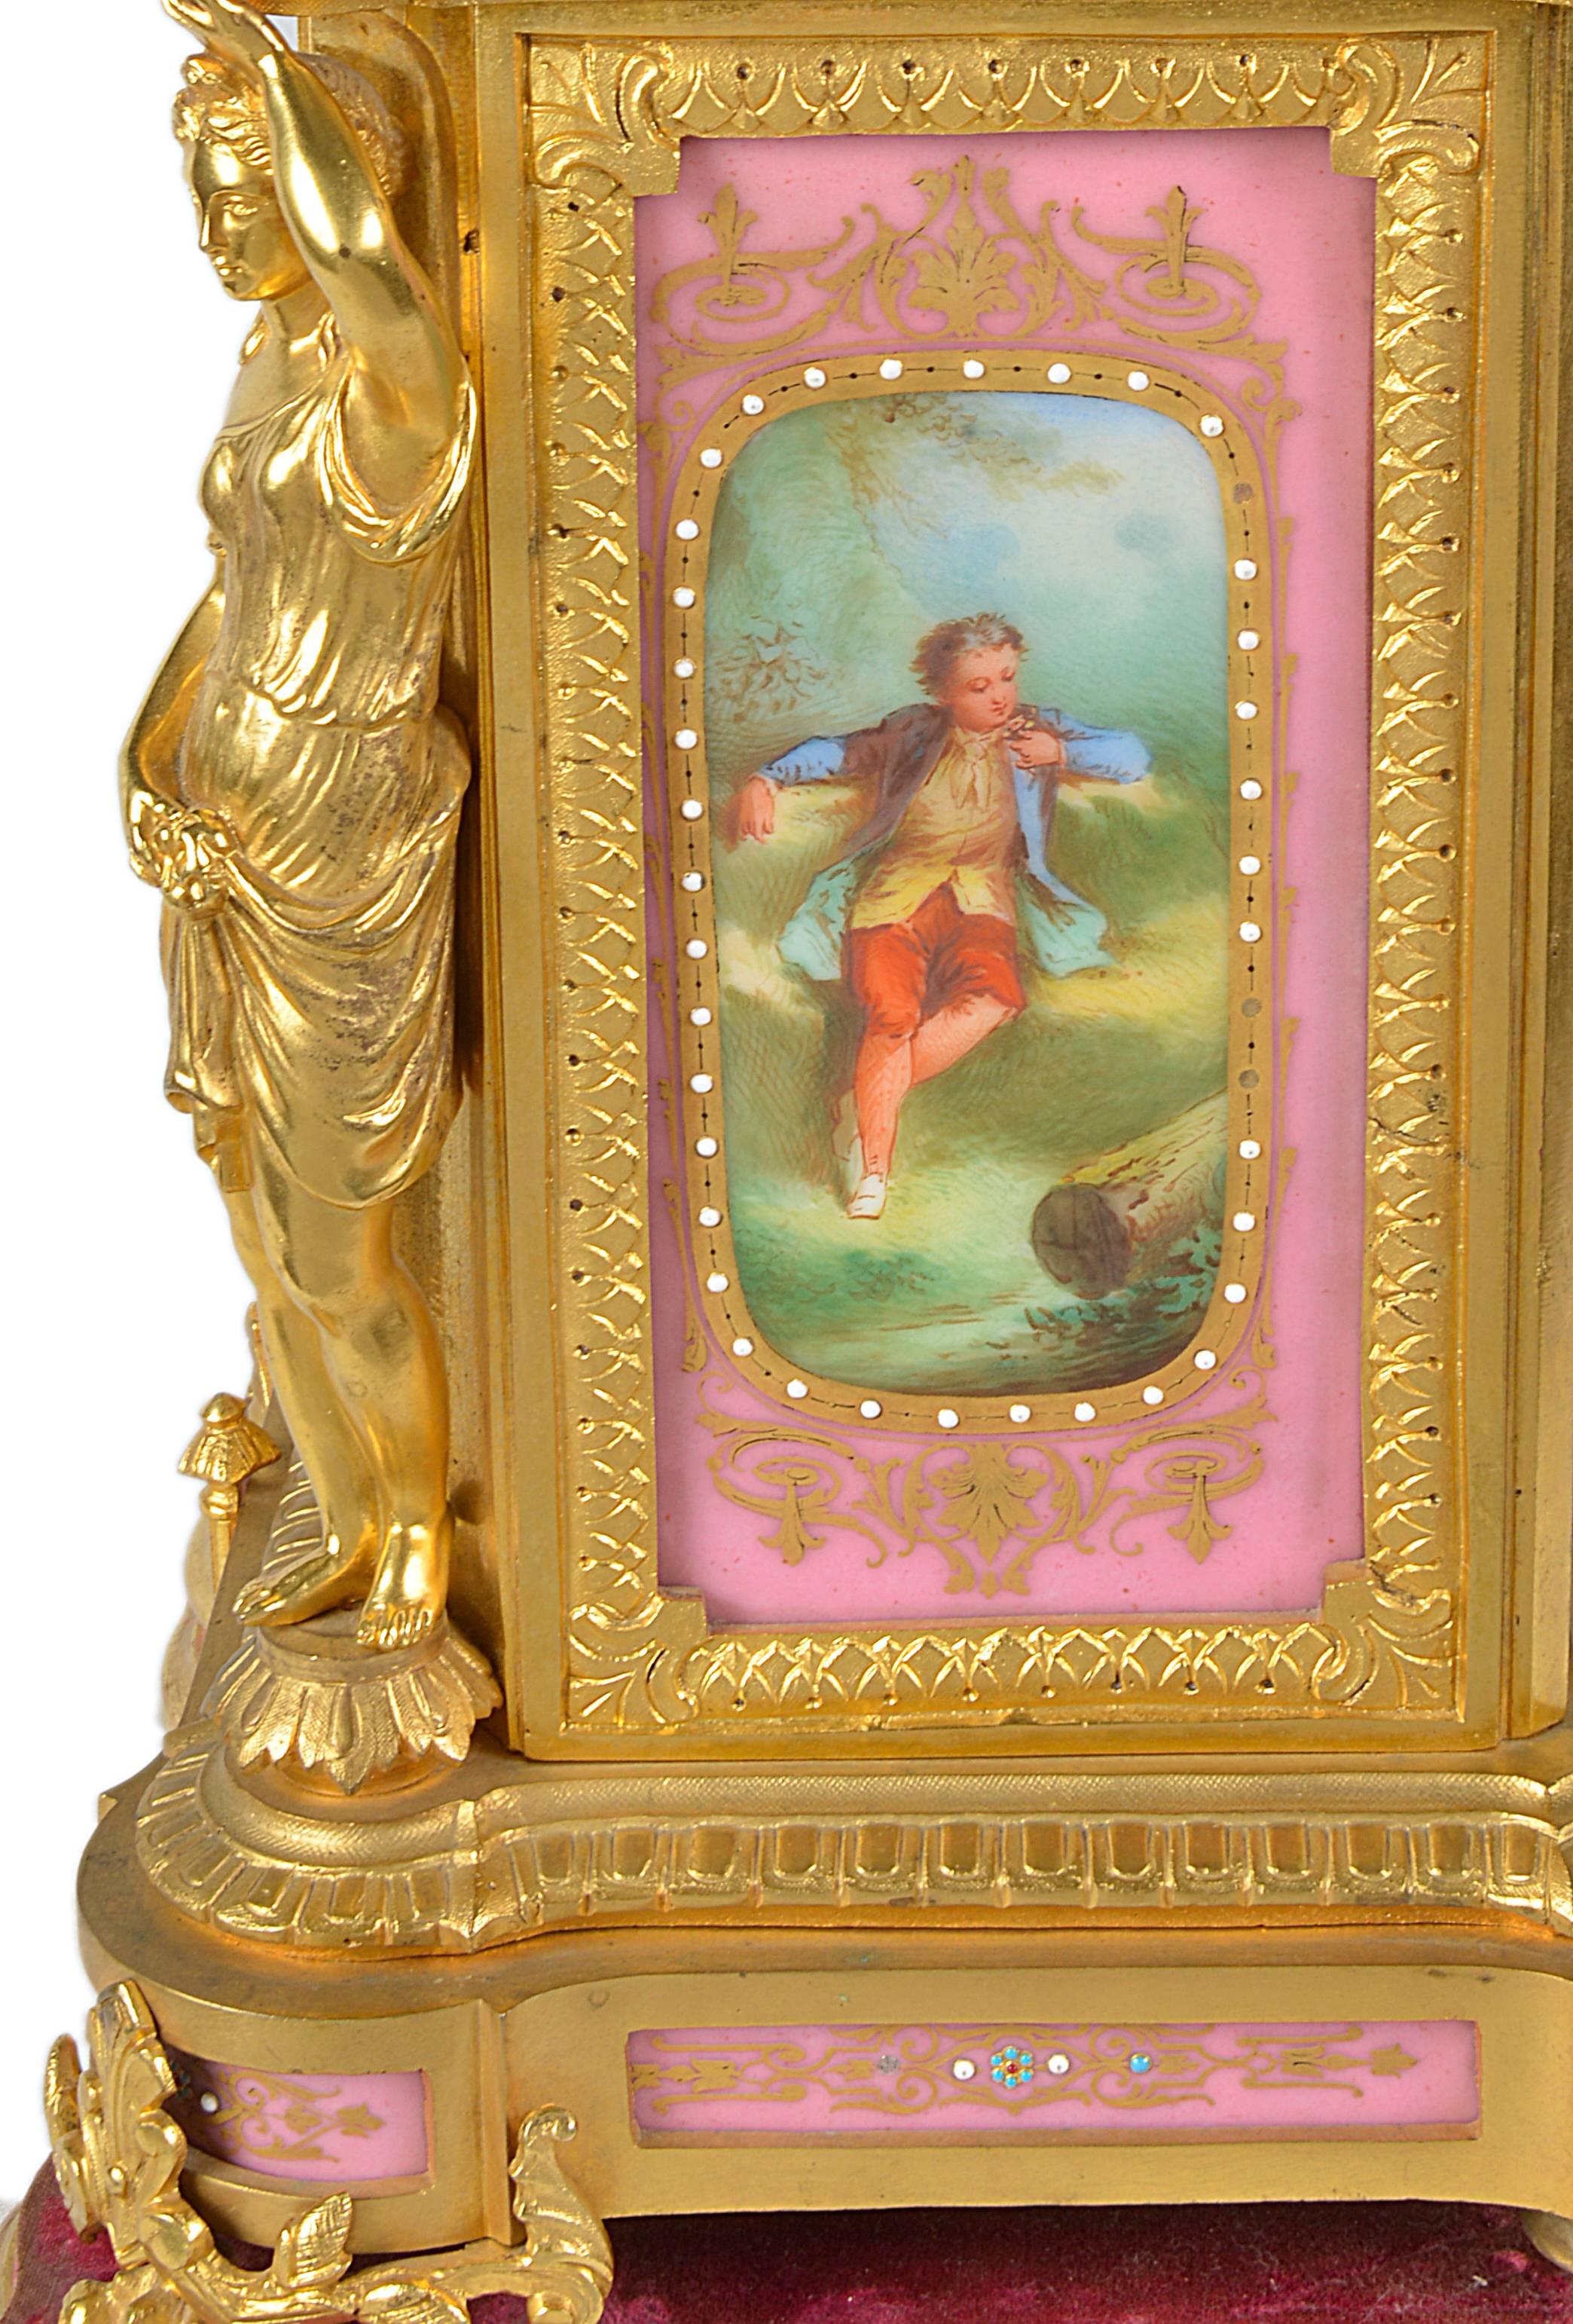 A very good quality French 19th century gilded ormolu and pink Sevres porcelain mantel clock. Having monopodia supports, a putti supporting an urn, classical romantic scenes painted to the clock face. An eight day movement striking on the hour and